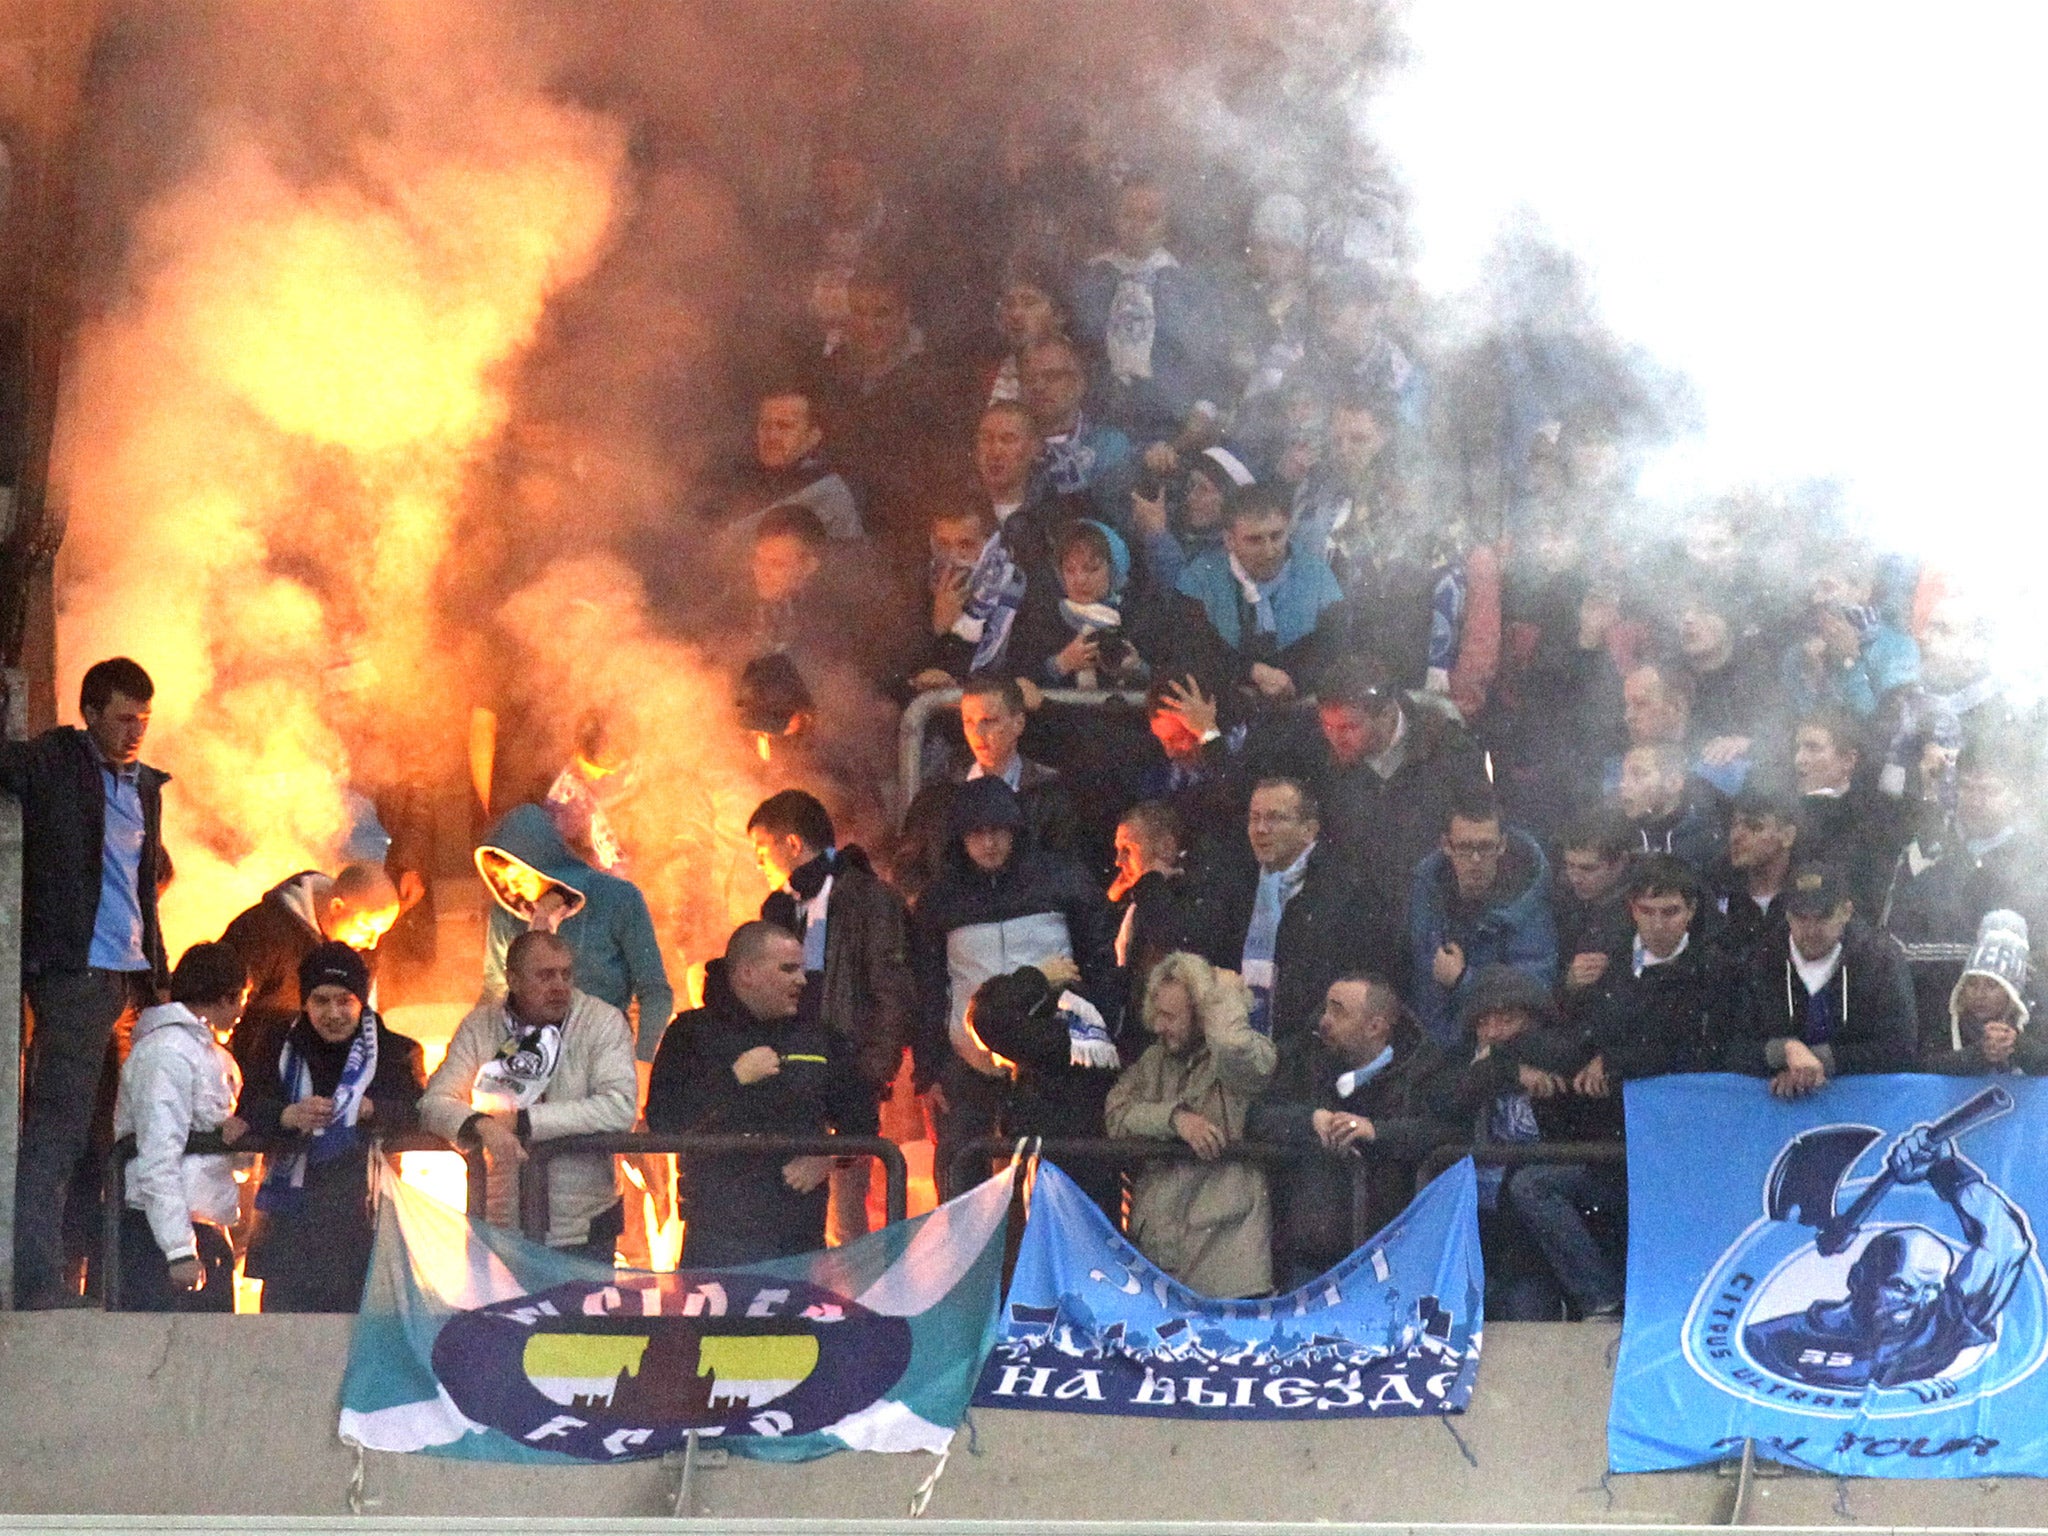 Zenit St Petersburg fans light flares during their Champions League group game against Anderlecht